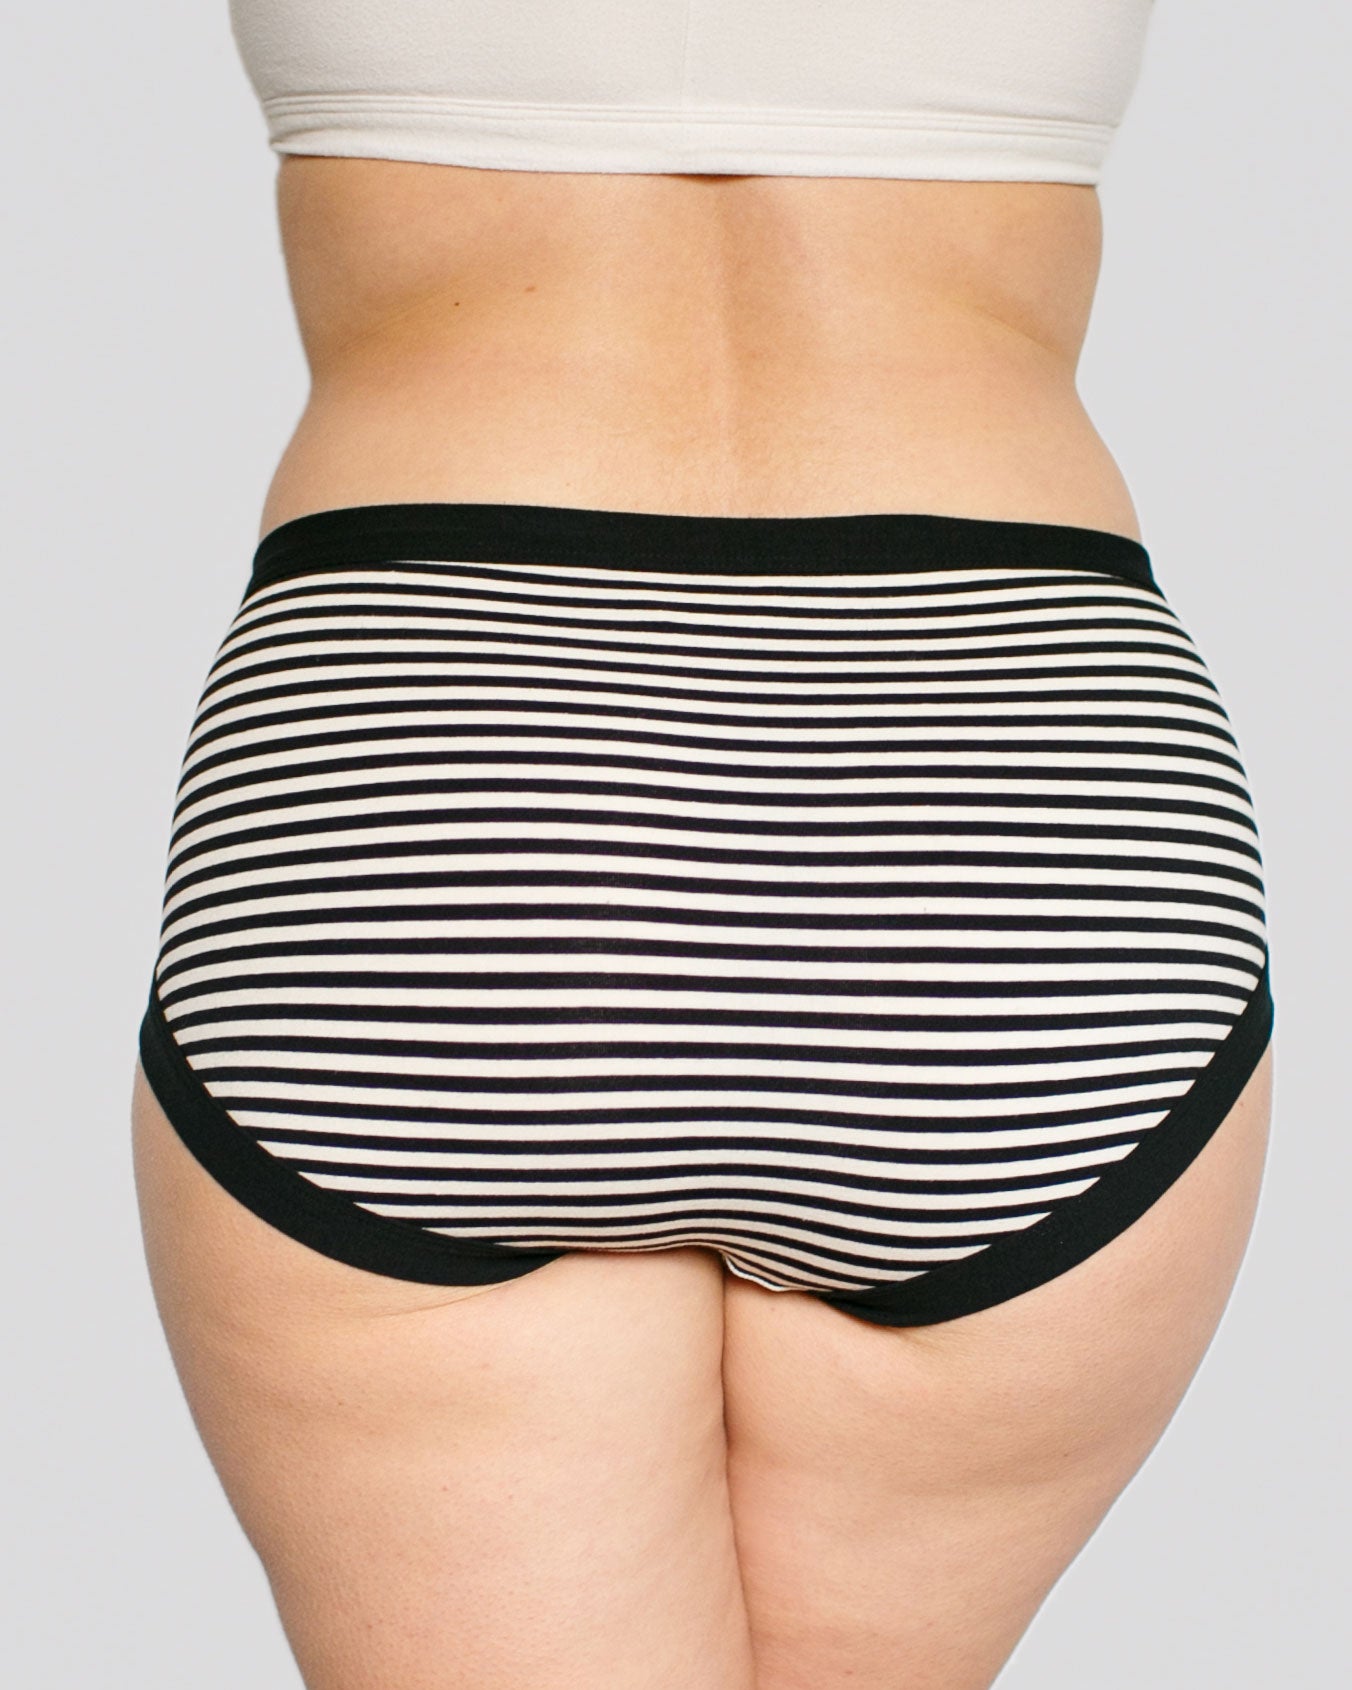 Model's bum wearing Thunderpants organic cotton Hipster style underwear in Black and White Stripes.